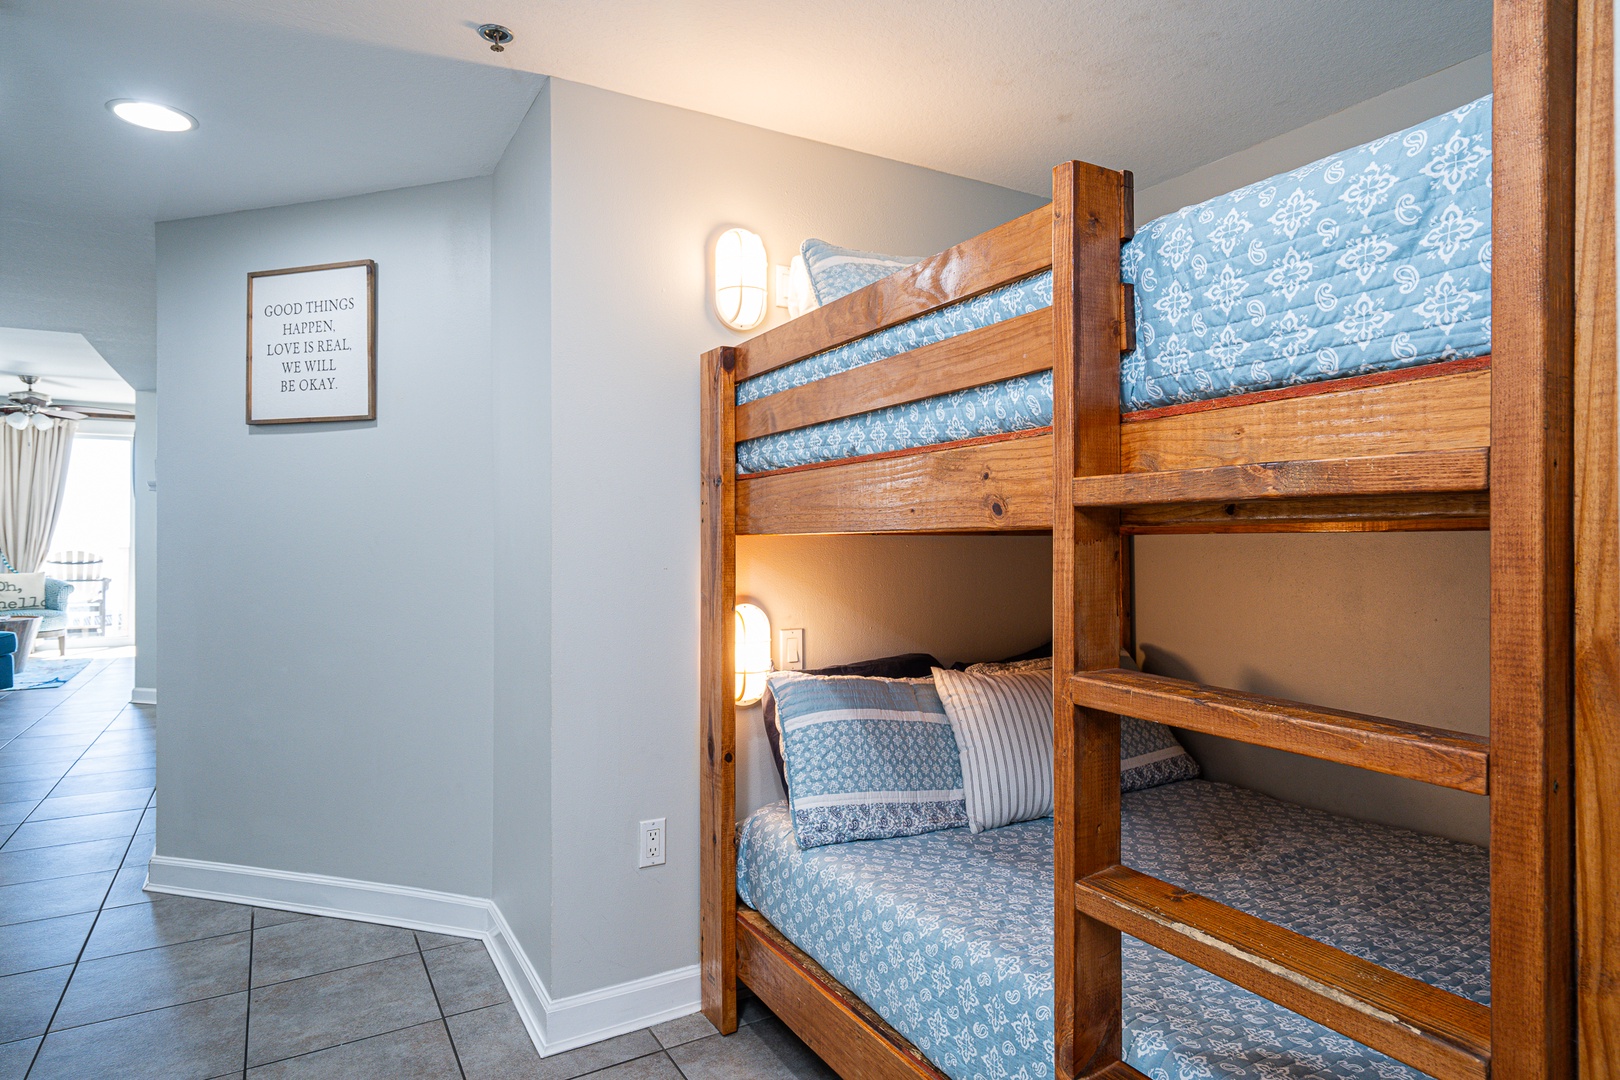 A multifunctional entryway with laundry and a cozy bunk bed nook